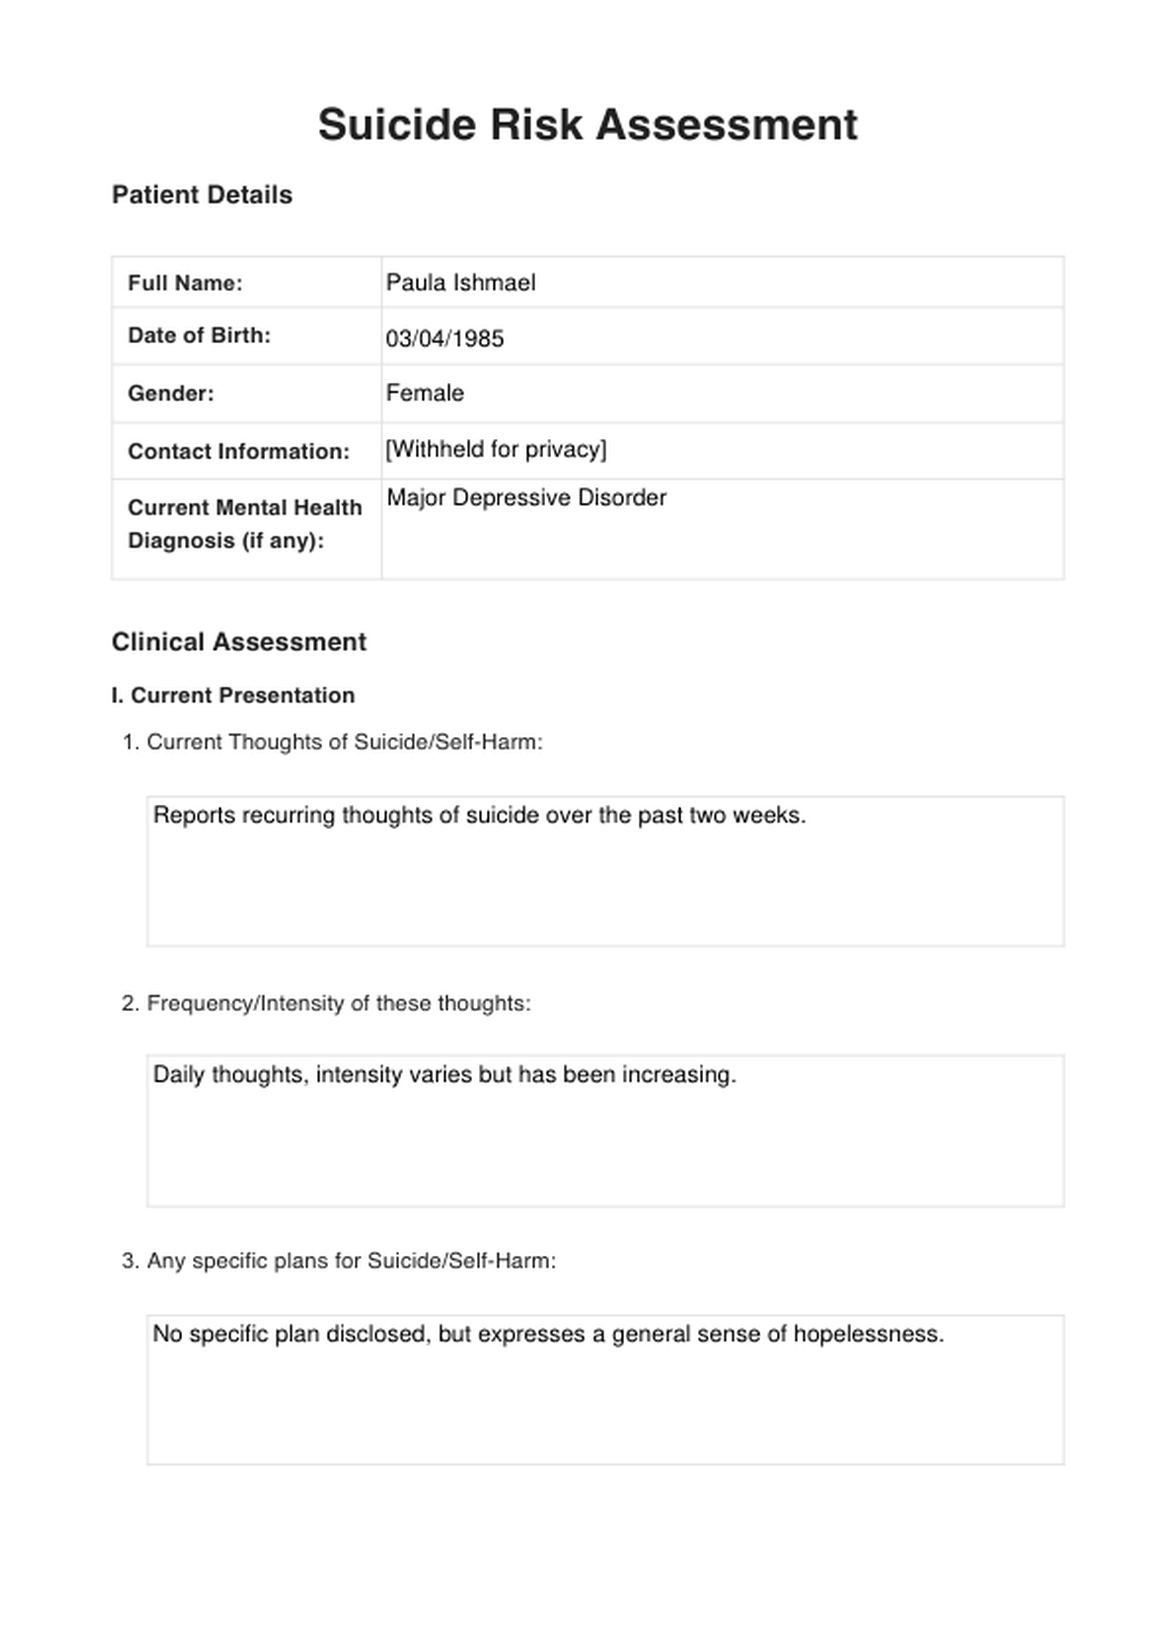 Suicide Risk Assessments PDF Example